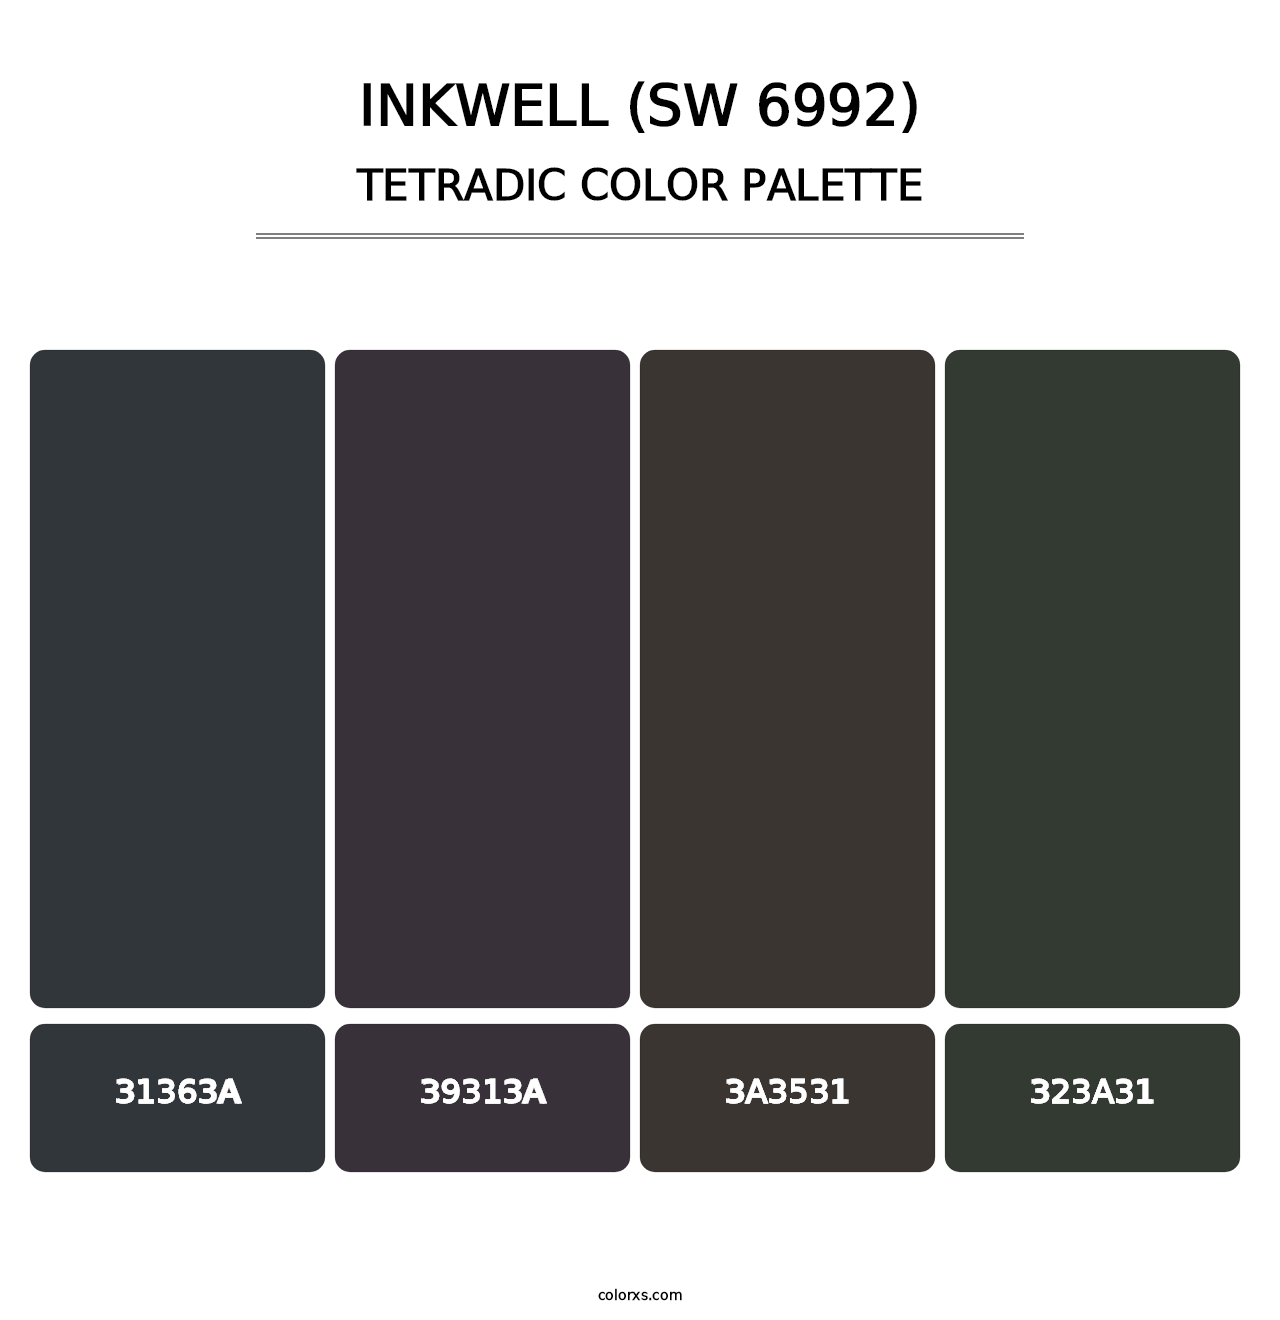 Inkwell (SW 6992) - Tetradic Color Palette